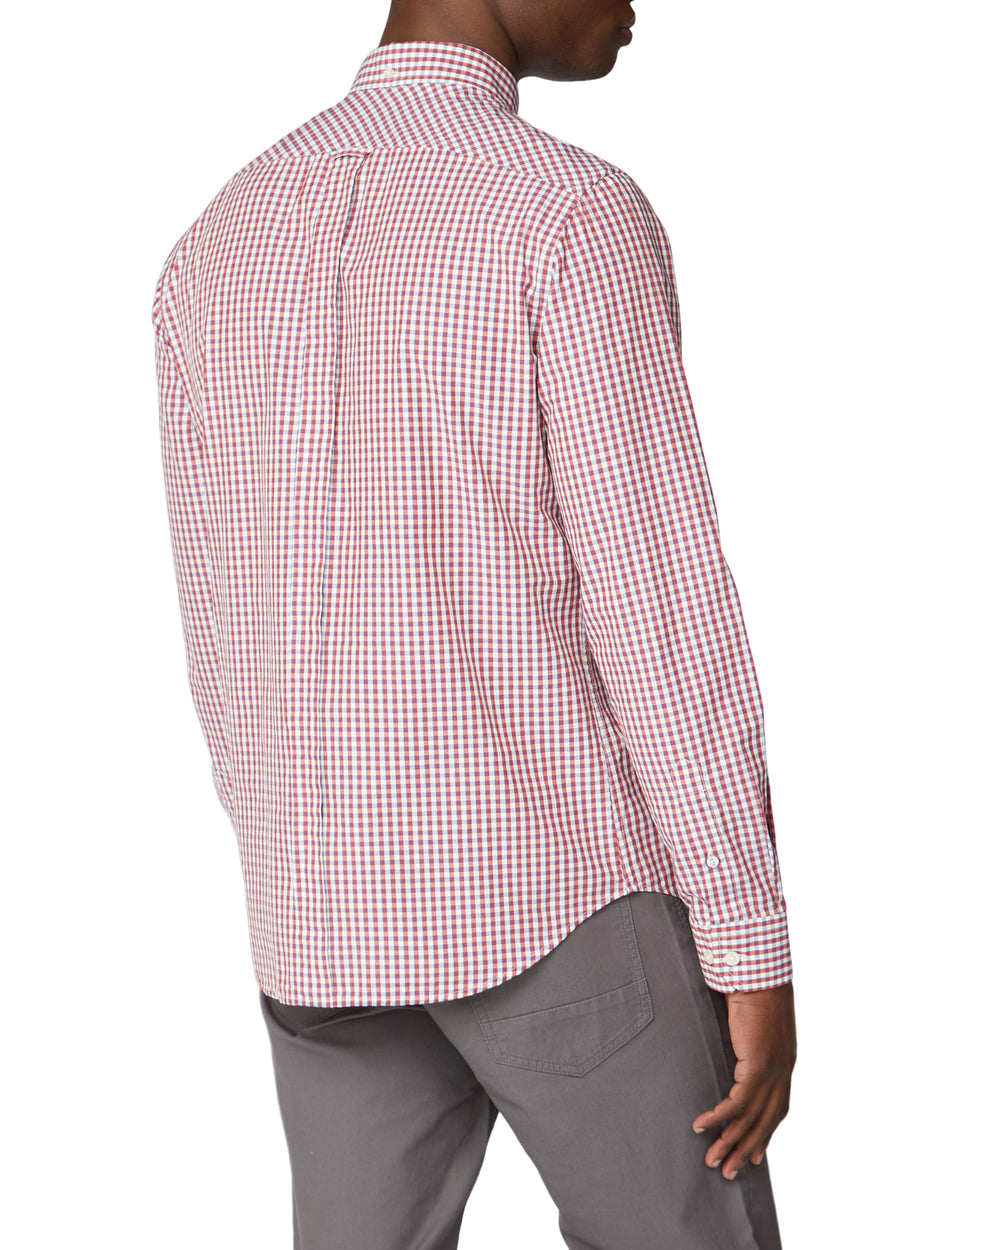 Long-Sleeve Signature Gingham Shirt - Red